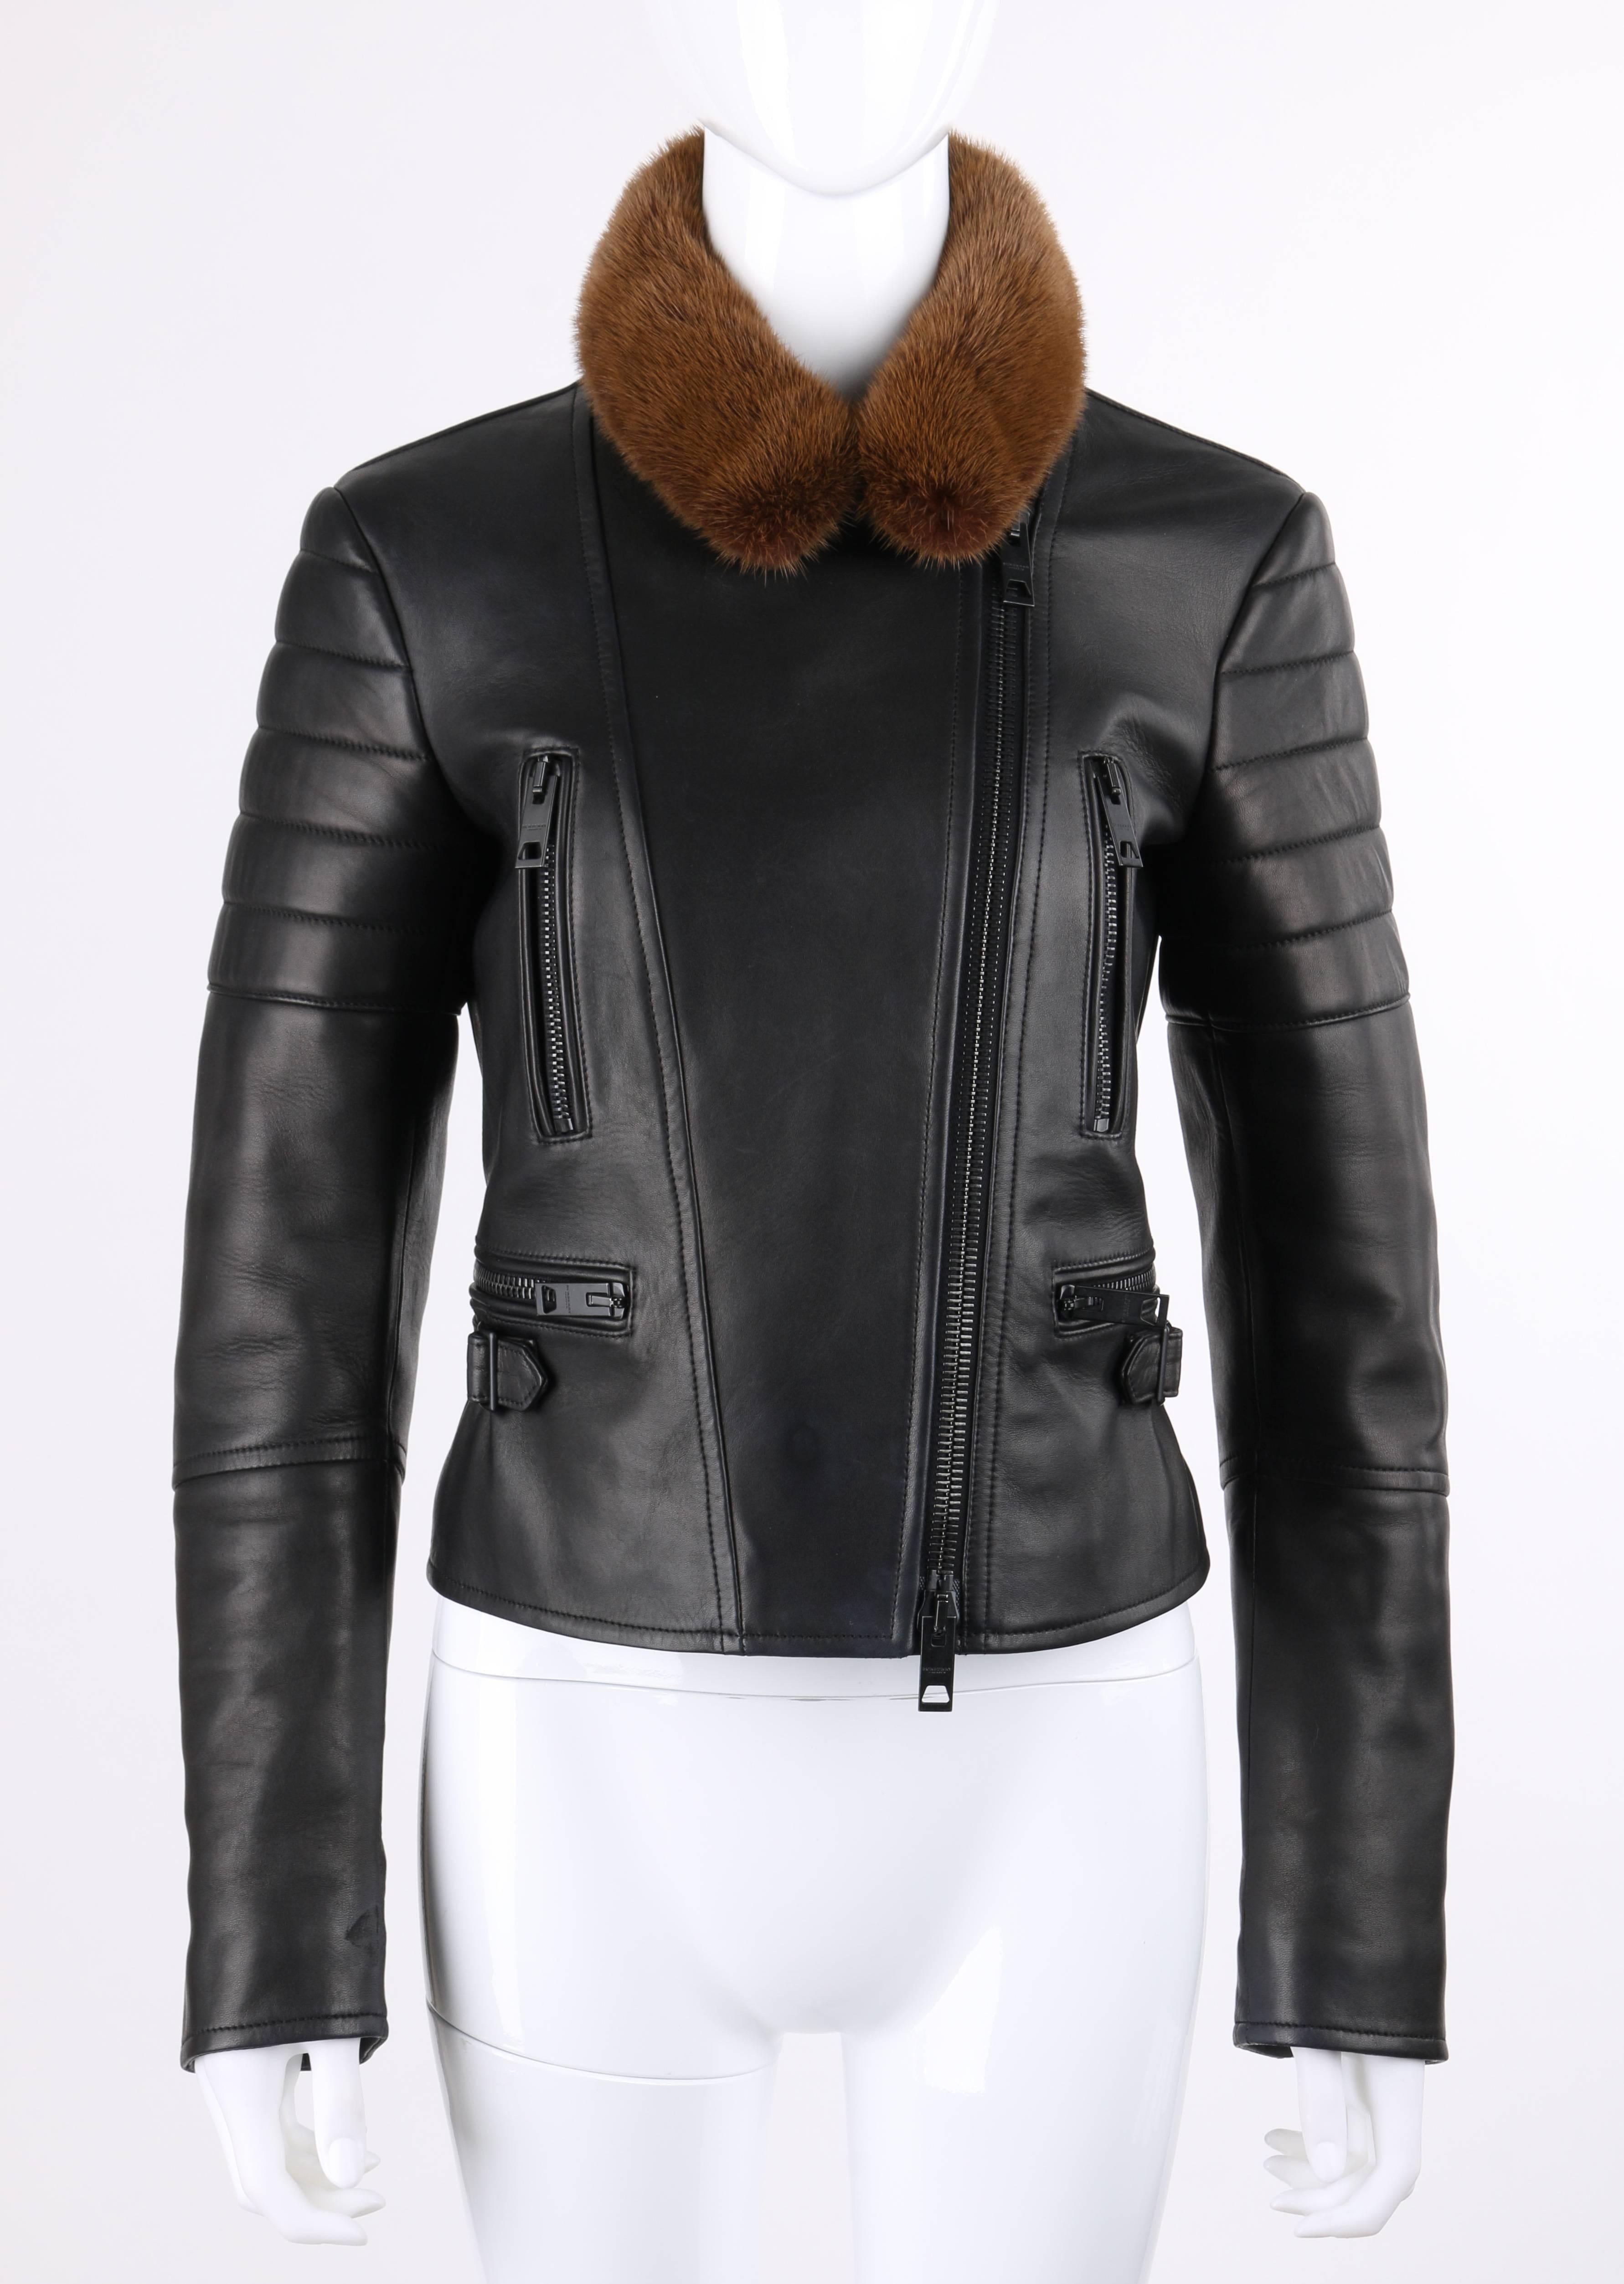 Burberry Prorsum Pre-fall 2013 black lambskin leather and copper mink fur collar motorcycle jacket. Long sleeves with quilted shoulder detail and metal zipper gussets at cuffs. Notched lapel collar with mink fur overlay and center front removable